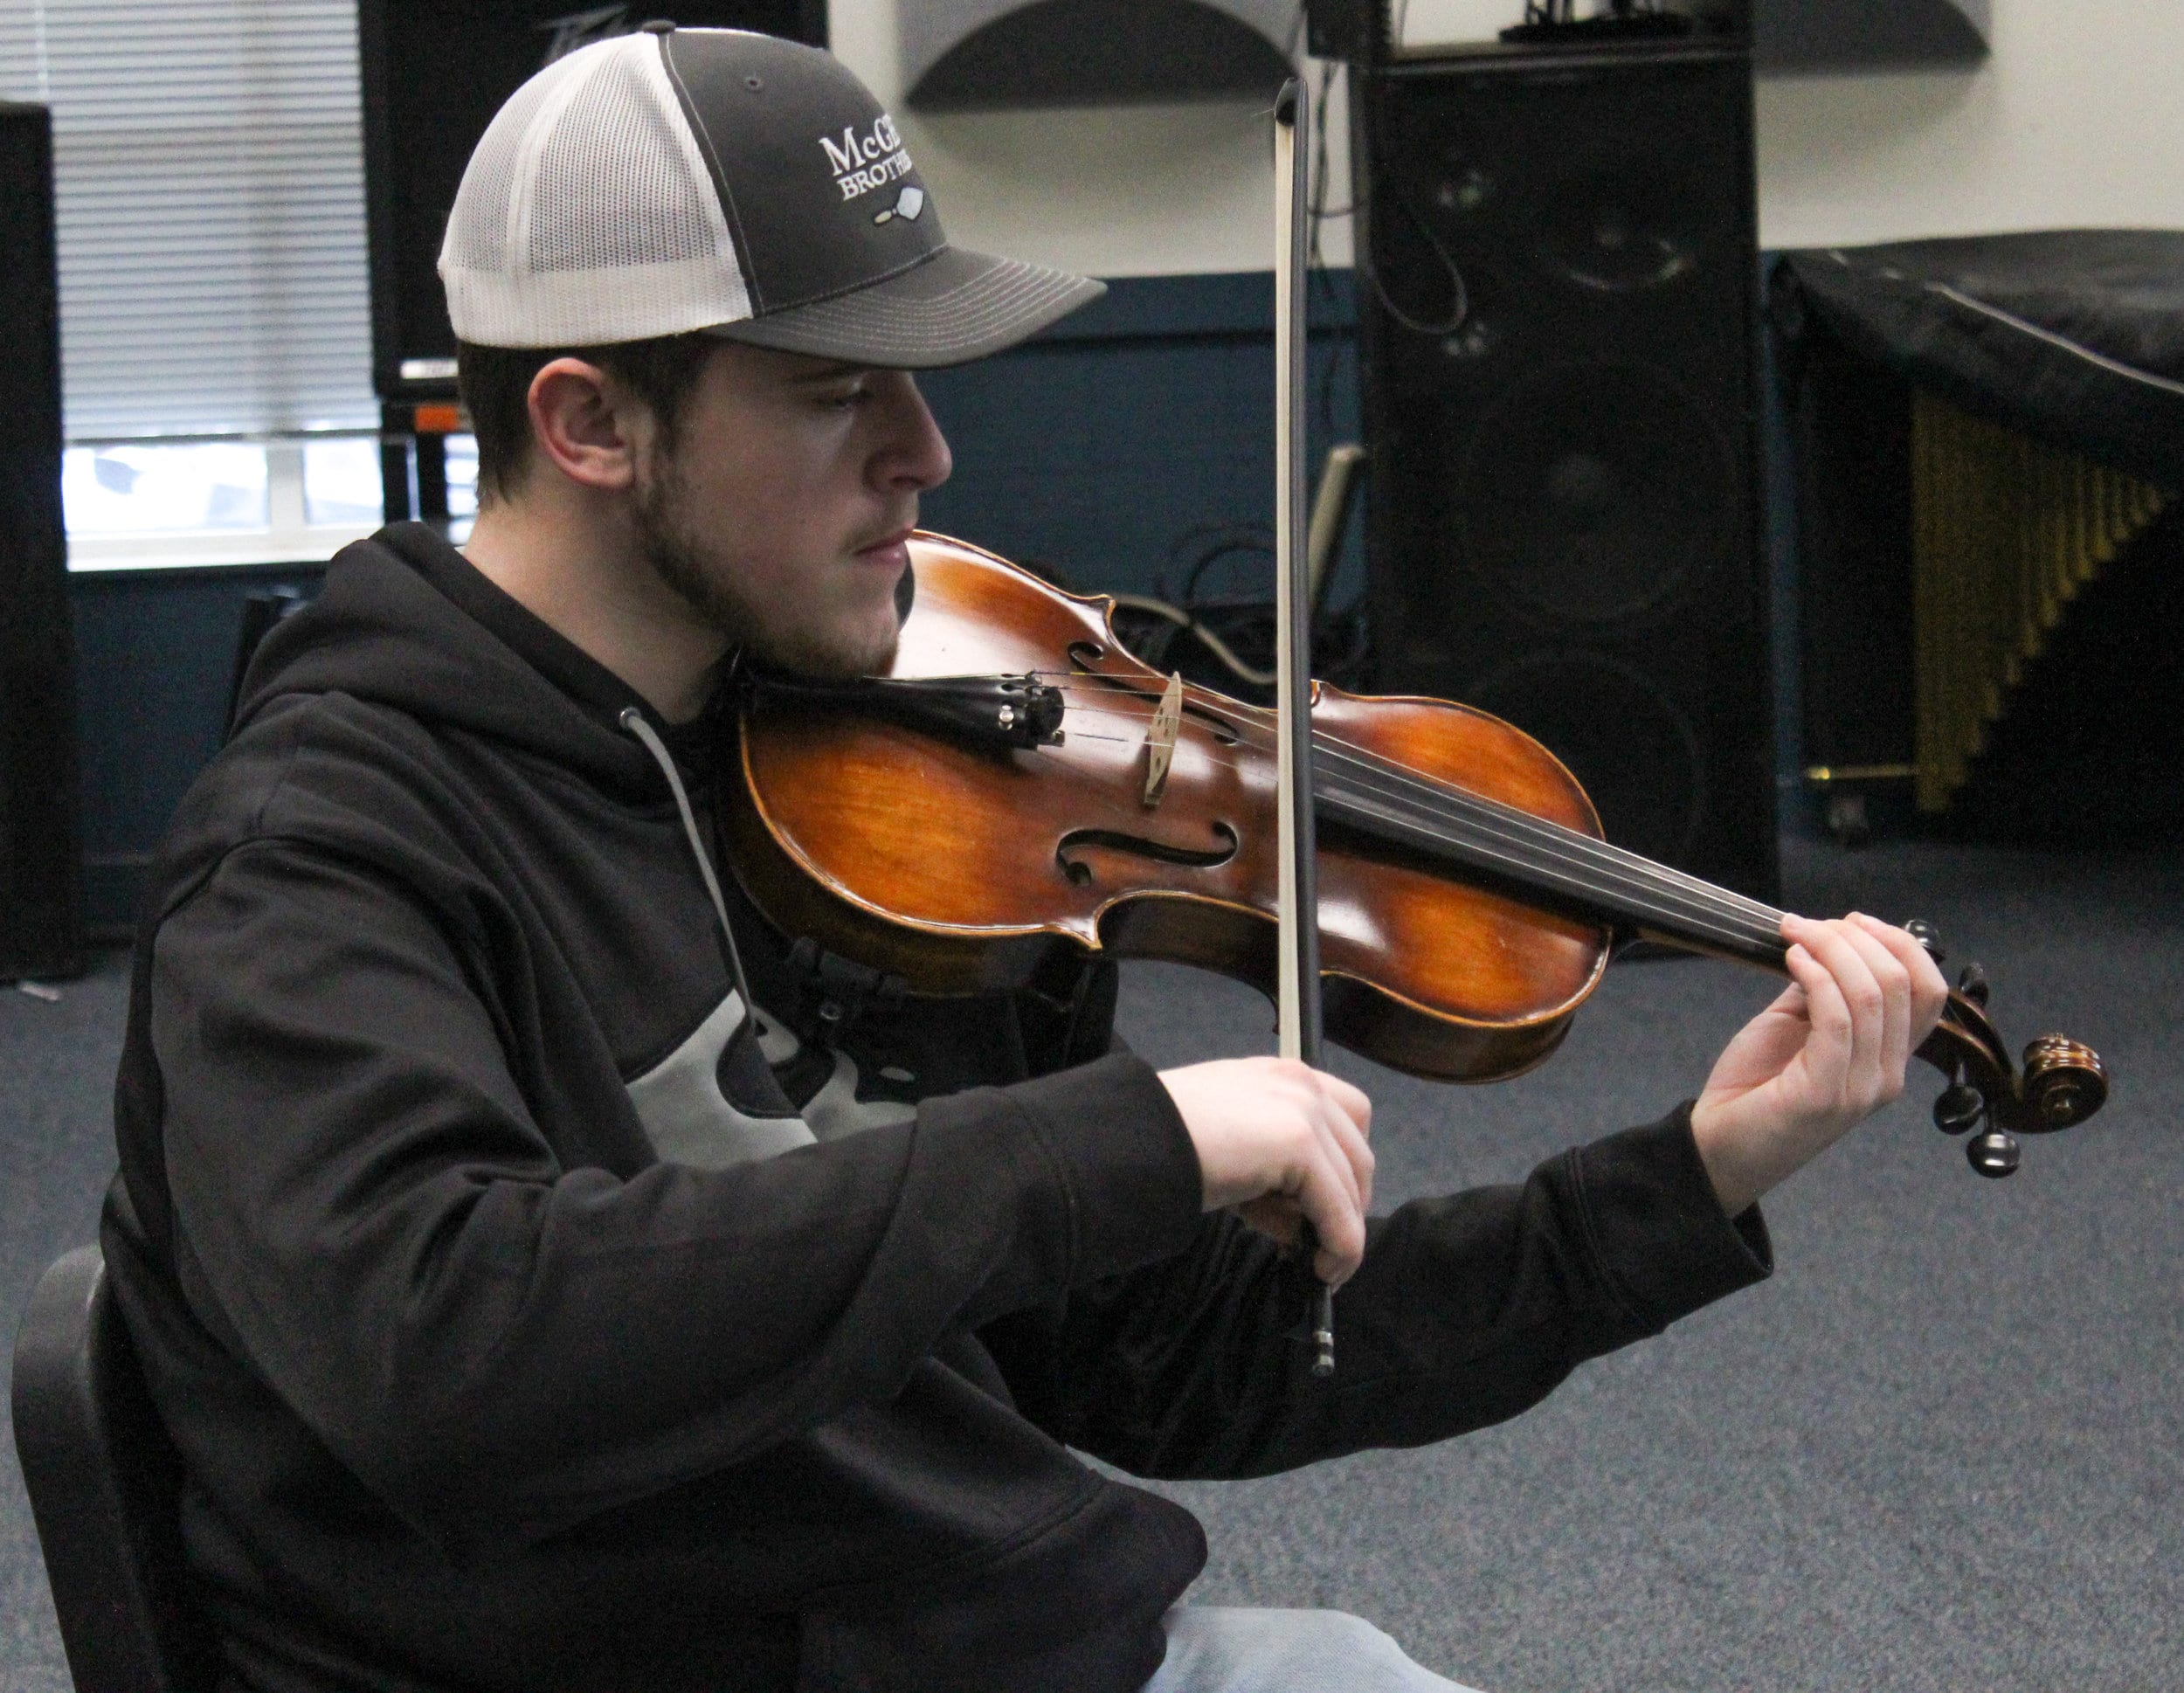 Brandon McAlister plays along with the orchestra using the violin.